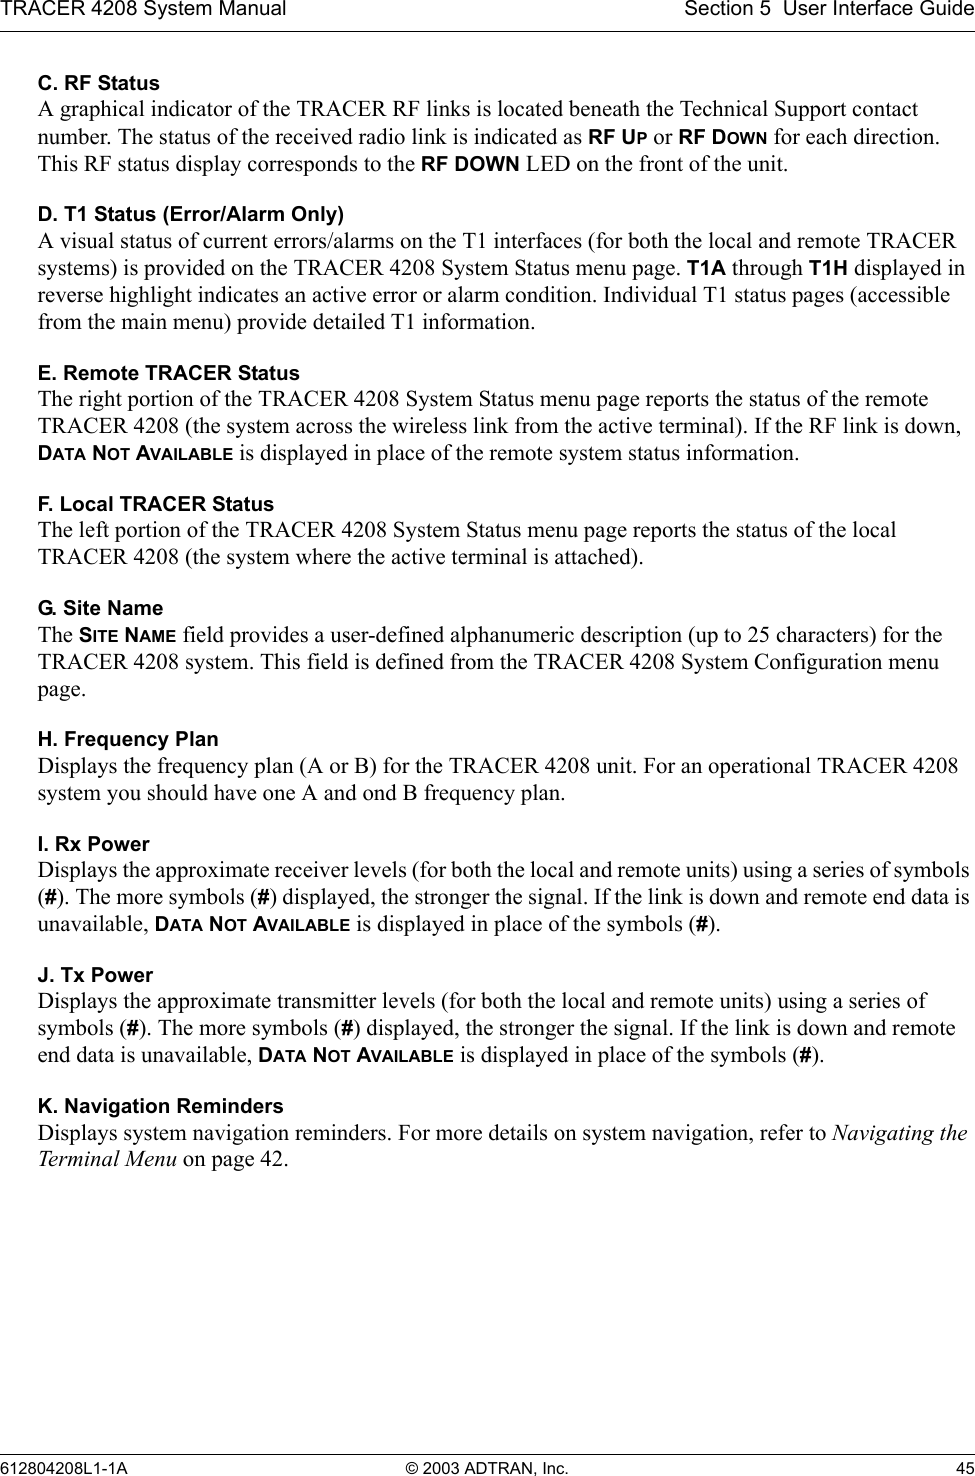 TRACER 4208 System Manual Section 5  User Interface Guide612804208L1-1A © 2003 ADTRAN, Inc. 45C. RF StatusA graphical indicator of the TRACER RF links is located beneath the Technical Support contact number. The status of the received radio link is indicated as RF UP or RF DOWN for each direction. This RF status display corresponds to the RF DOWN LED on the front of the unit.D. T1 Status (Error/Alarm Only)A visual status of current errors/alarms on the T1 interfaces (for both the local and remote TRACER systems) is provided on the TRACER 4208 System Status menu page. T1A through T1H displayed in reverse highlight indicates an active error or alarm condition. Individual T1 status pages (accessible from the main menu) provide detailed T1 information.E. Remote TRACER StatusThe right portion of the TRACER 4208 System Status menu page reports the status of the remote TRACER 4208 (the system across the wireless link from the active terminal). If the RF link is down, DATA NOT AVAILABLE is displayed in place of the remote system status information.F. Local TRACER StatusThe left portion of the TRACER 4208 System Status menu page reports the status of the local TRACER 4208 (the system where the active terminal is attached). G. Si t e  Nam eThe SITE NAME field provides a user-defined alphanumeric description (up to 25 characters) for the TRACER 4208 system. This field is defined from the TRACER 4208 System Configuration menu page.H. Frequency PlanDisplays the frequency plan (A or B) for the TRACER 4208 unit. For an operational TRACER 4208 system you should have one A and ond B frequency plan.I. Rx PowerDisplays the approximate receiver levels (for both the local and remote units) using a series of symbols (#). The more symbols (#) displayed, the stronger the signal. If the link is down and remote end data is unavailable, DATA NOT AVAILABLE is displayed in place of the symbols (#).J. Tx PowerDisplays the approximate transmitter levels (for both the local and remote units) using a series of symbols (#). The more symbols (#) displayed, the stronger the signal. If the link is down and remote end data is unavailable, DATA NOT AVAILABLE is displayed in place of the symbols (#).K. Navigation RemindersDisplays system navigation reminders. For more details on system navigation, refer to Navigating the Terminal Menu on page 42. 